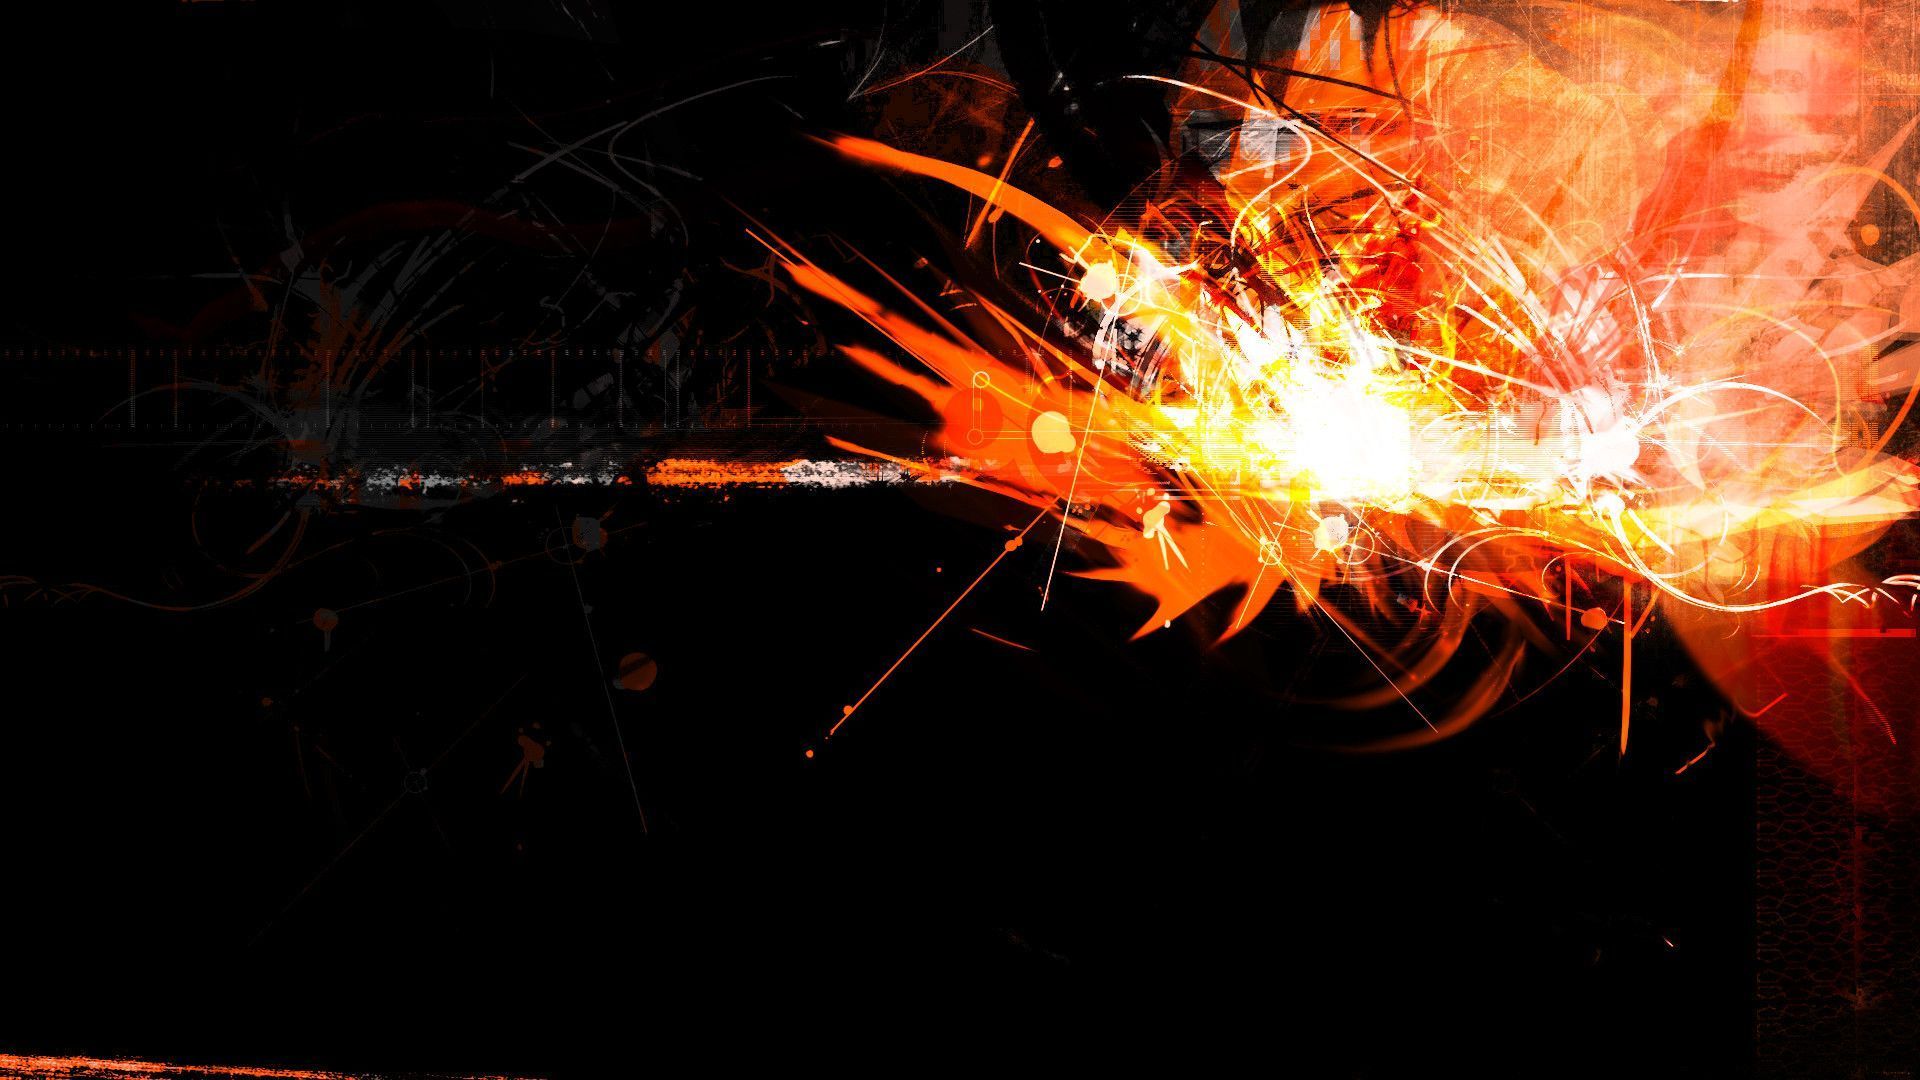 Abstract Wallpaper 1920X1080 - HD Images New